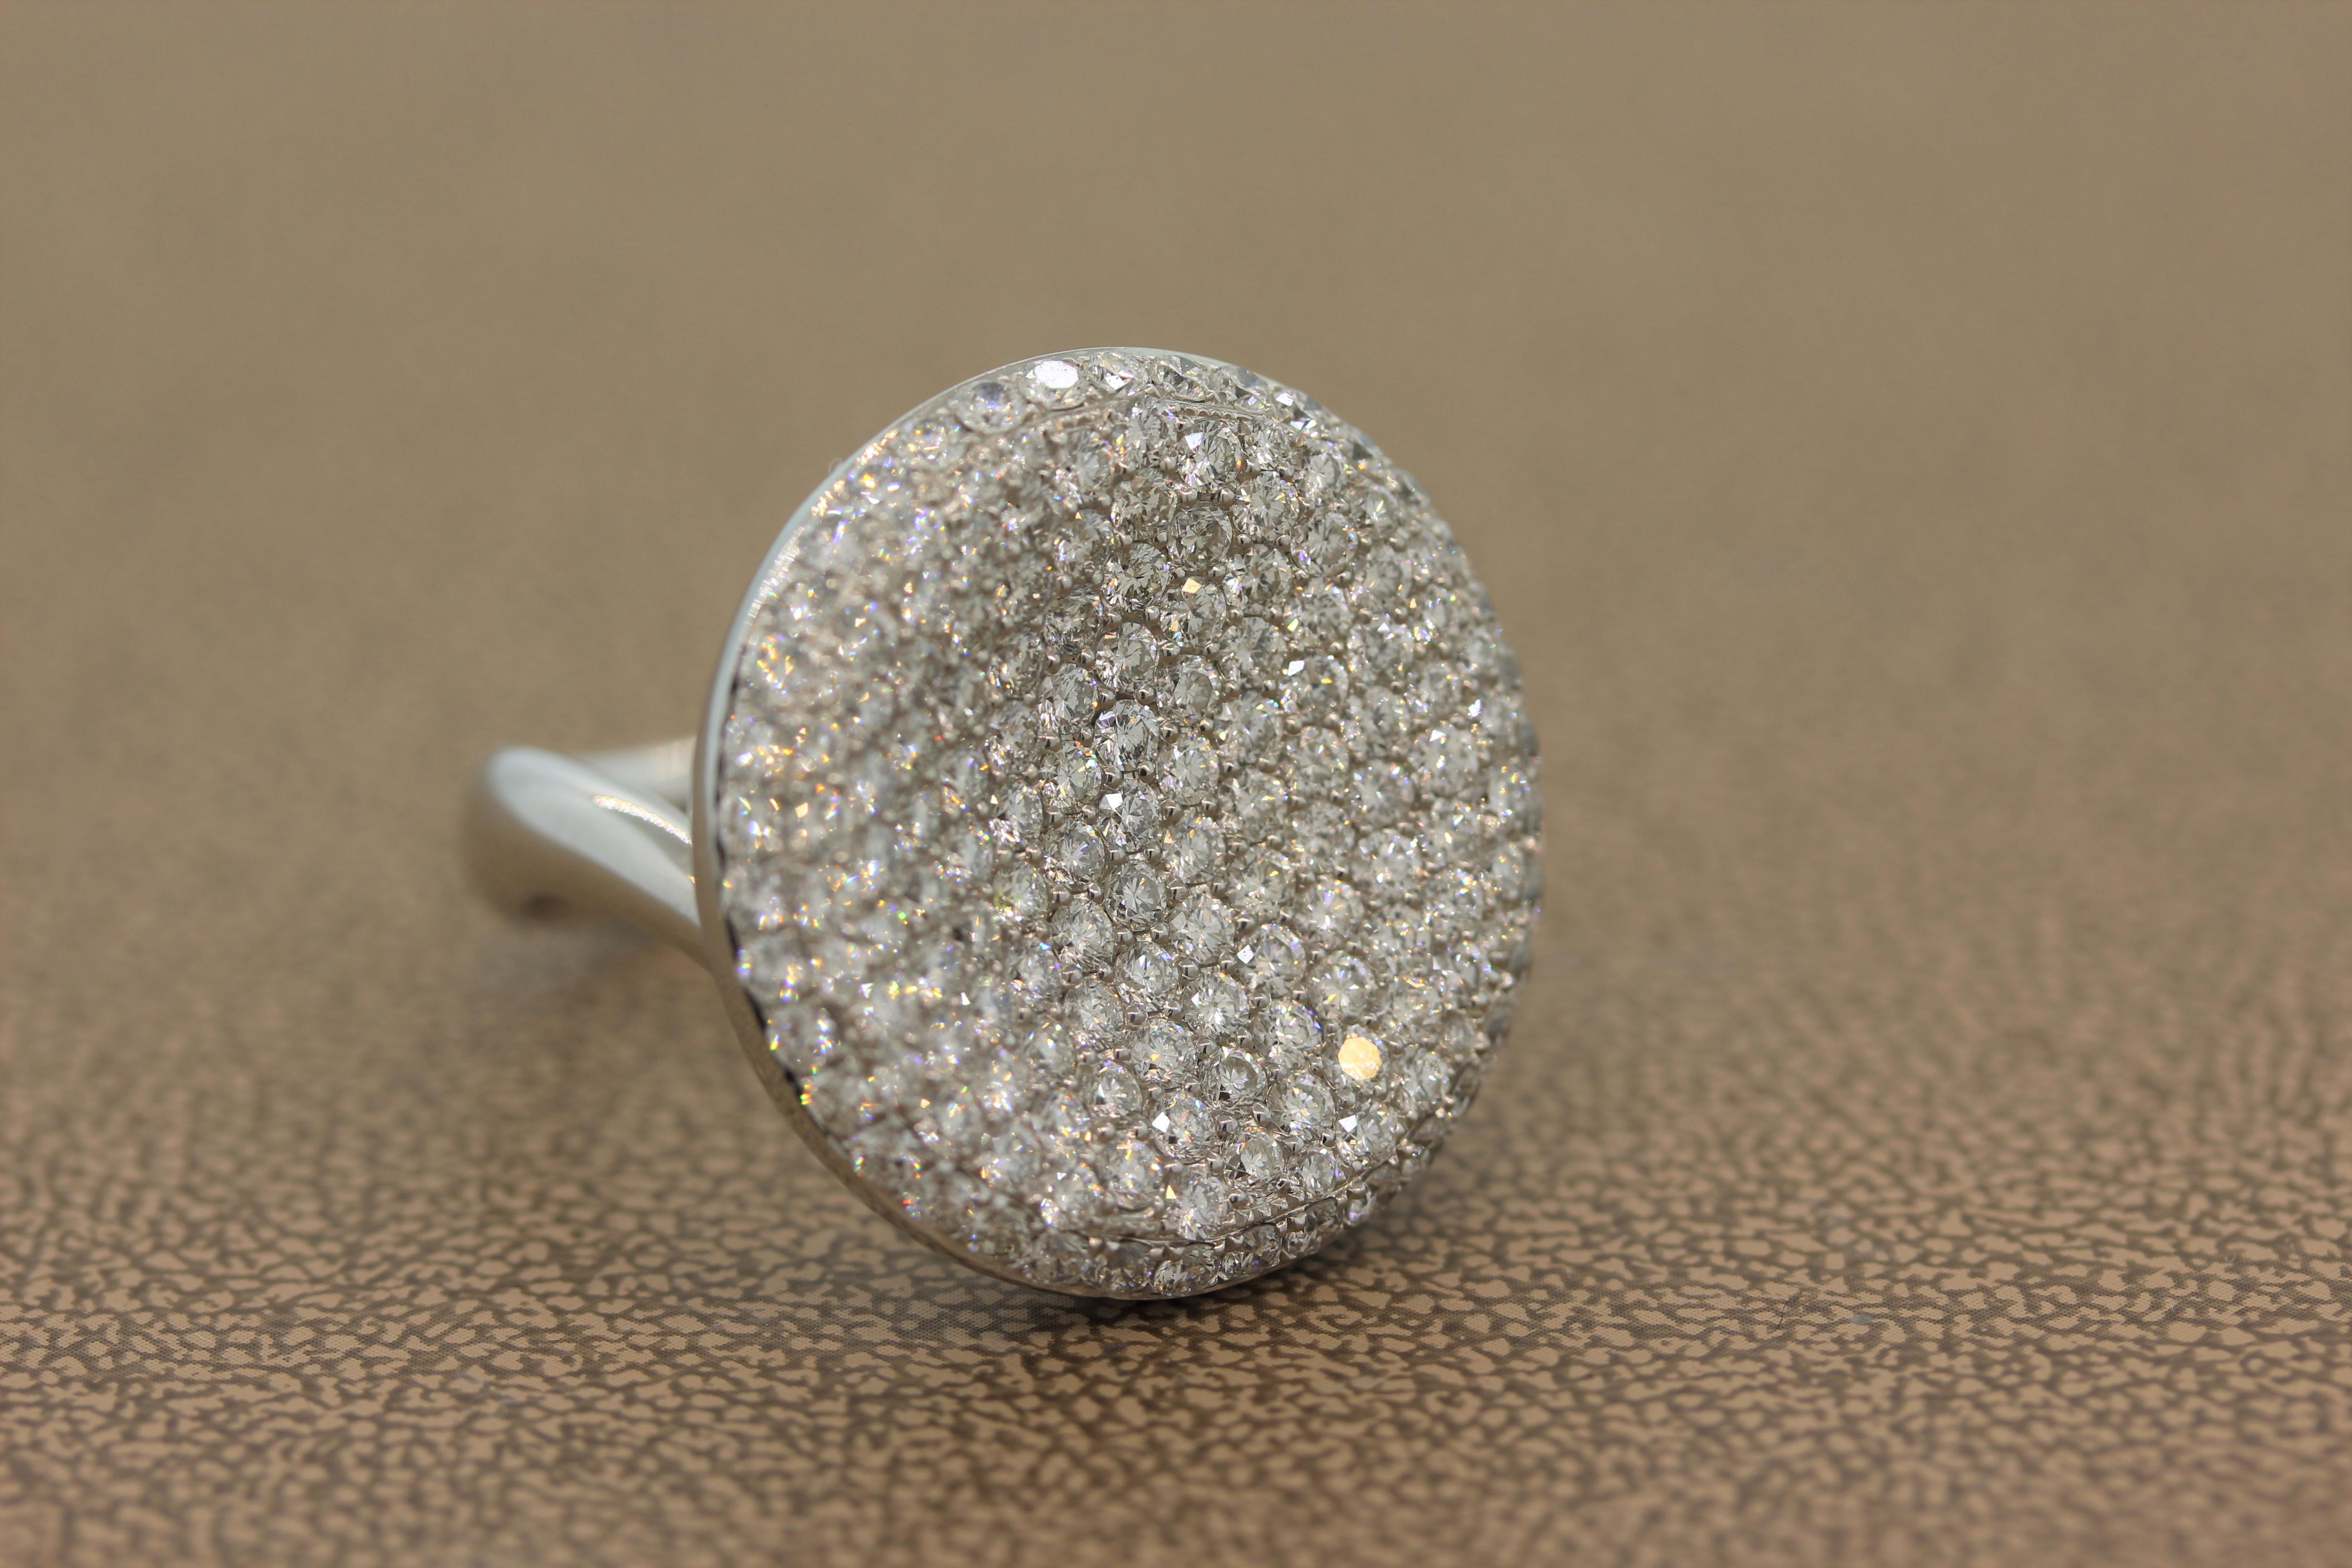 This cocktail ring is an absolute stunner! A glamorous ring featuring 3.95 carats of VS quality round brilliant cut diamonds pave set in a spherical concave ring. The shimmering round cut diamonds are set in 18K white gold.
Ring Size 6.75 (Sizable)
